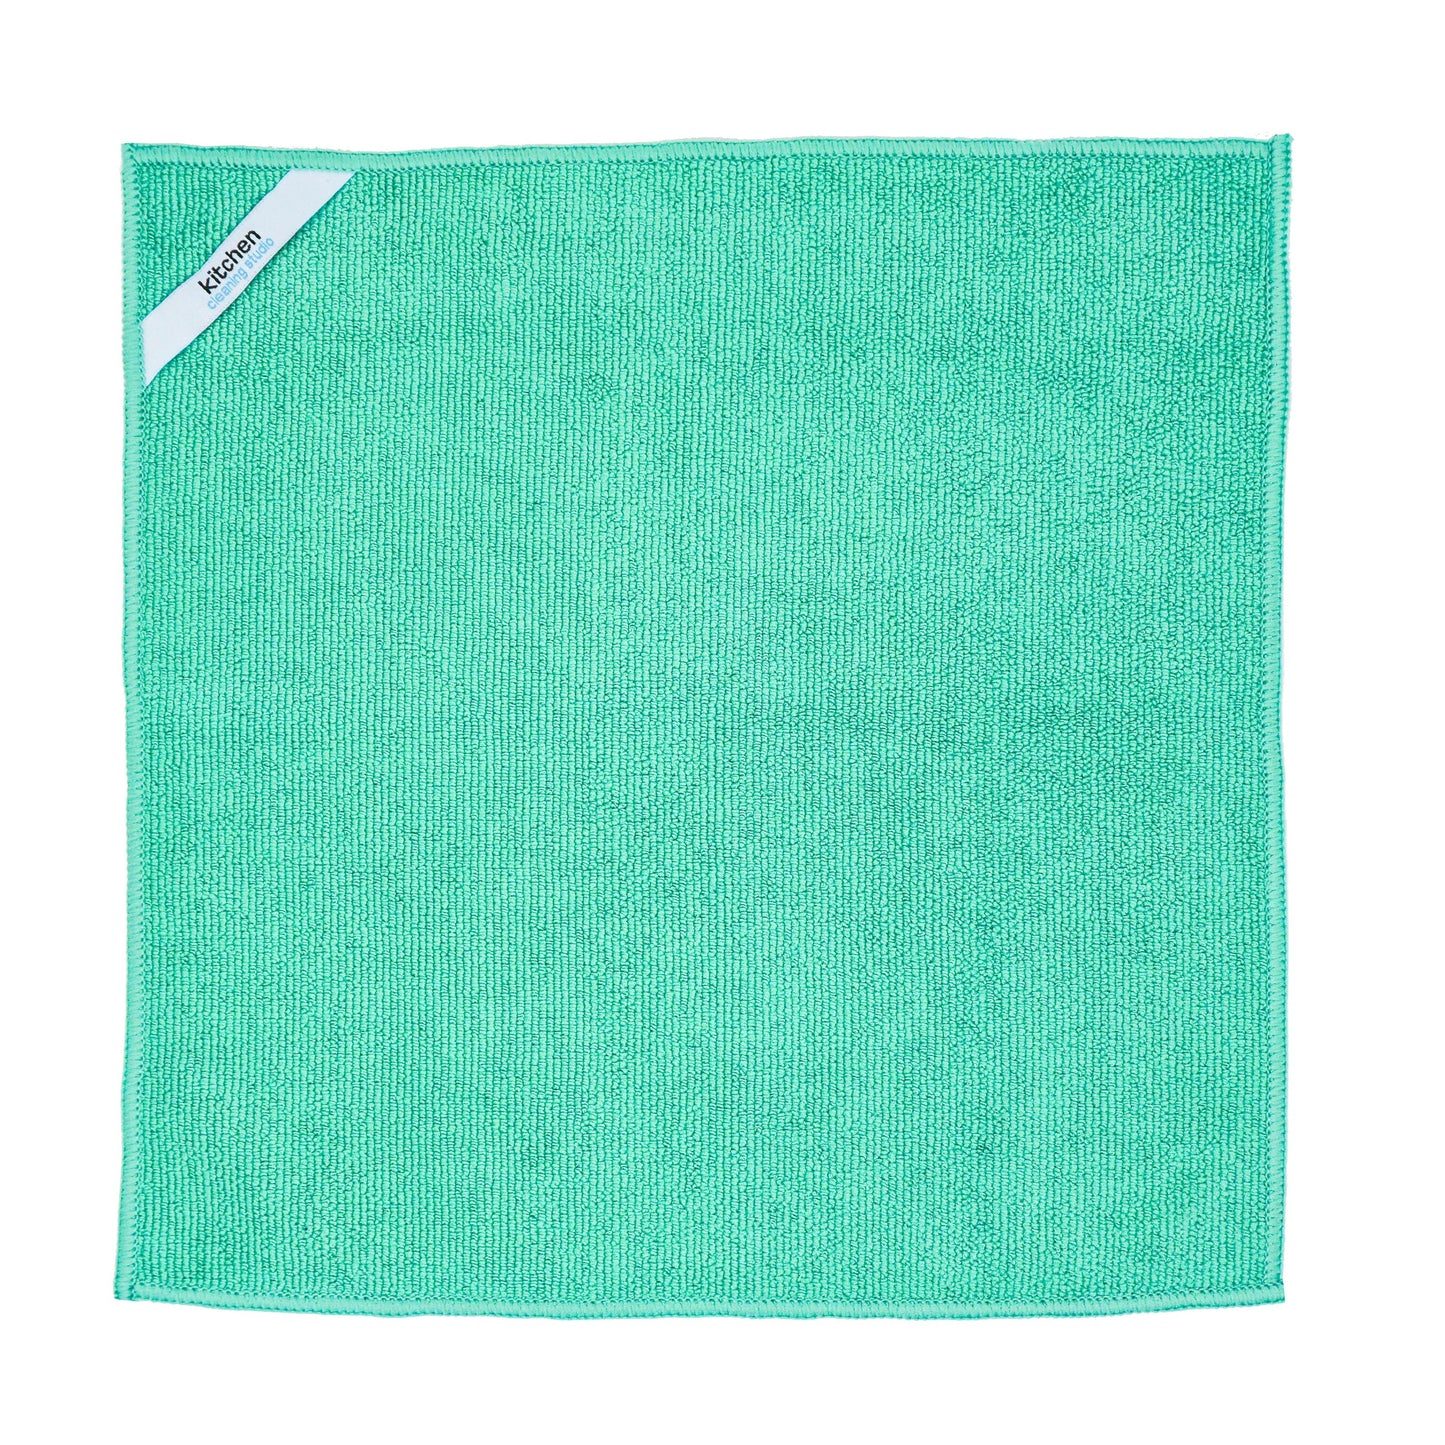 Premium Microfiber Cleaning Cloths: All-In-One Kit